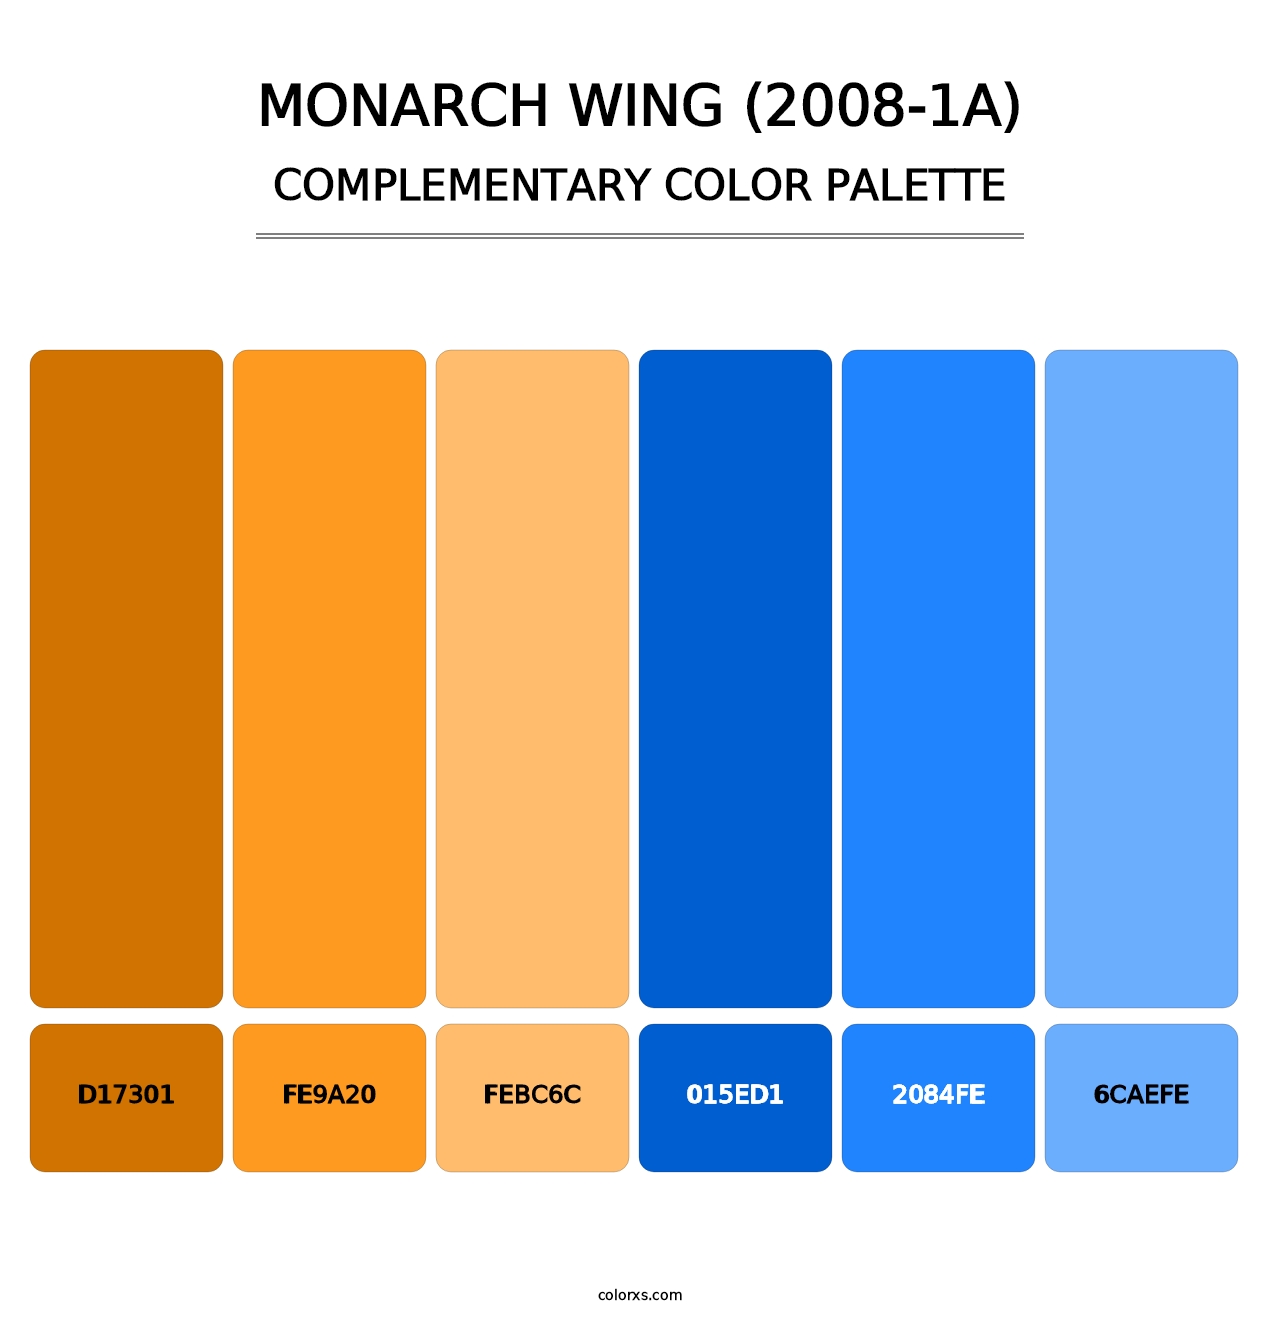 Monarch Wing (2008-1A) - Complementary Color Palette